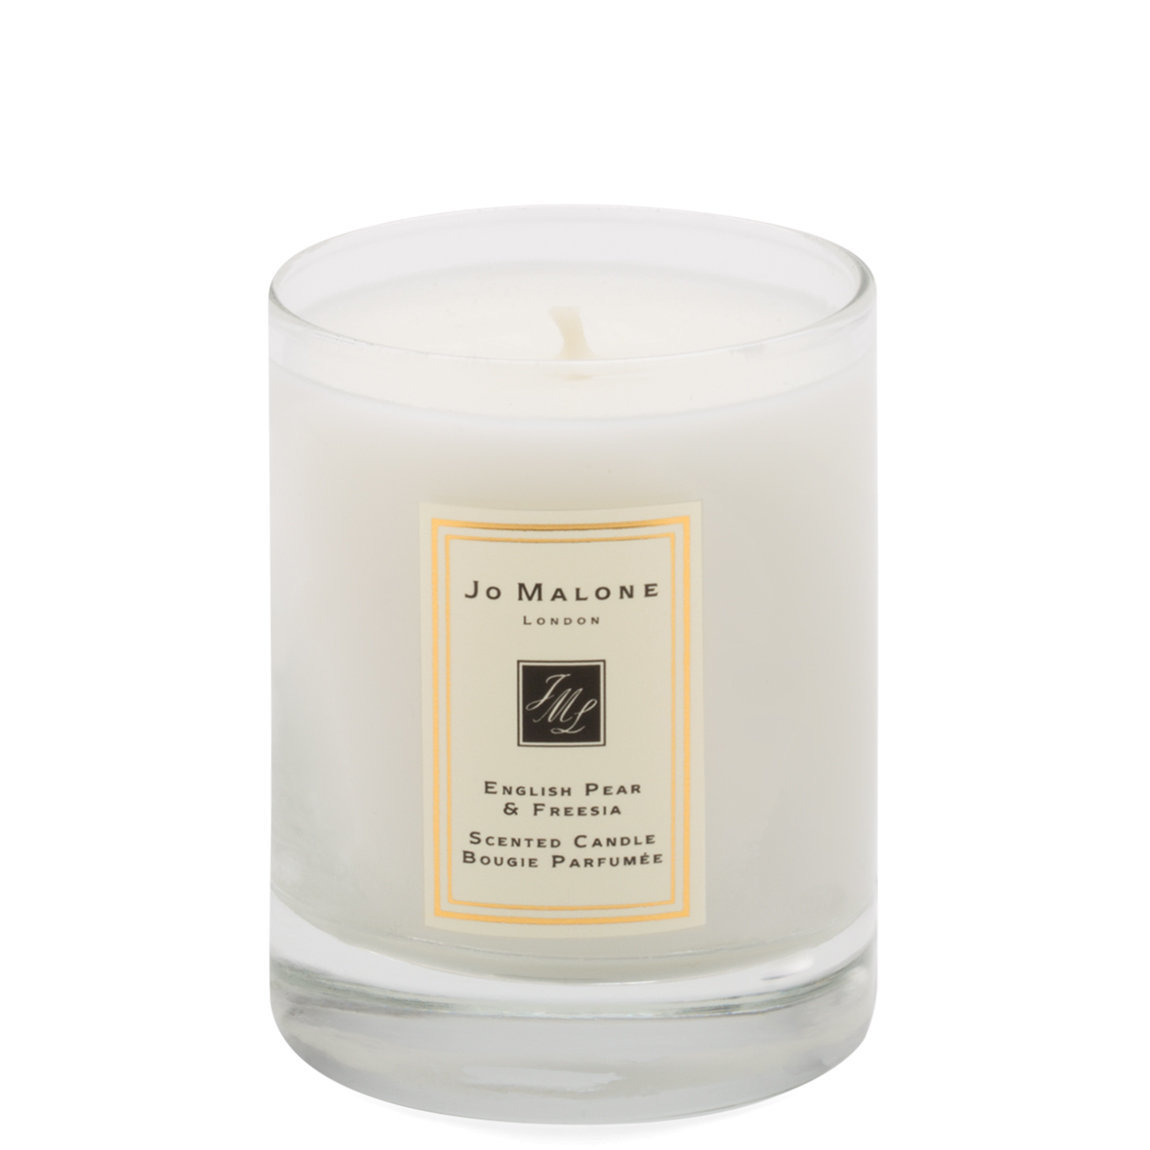 Jo Malone London English Pear & Freesia Scented Candle 60g Travel ...